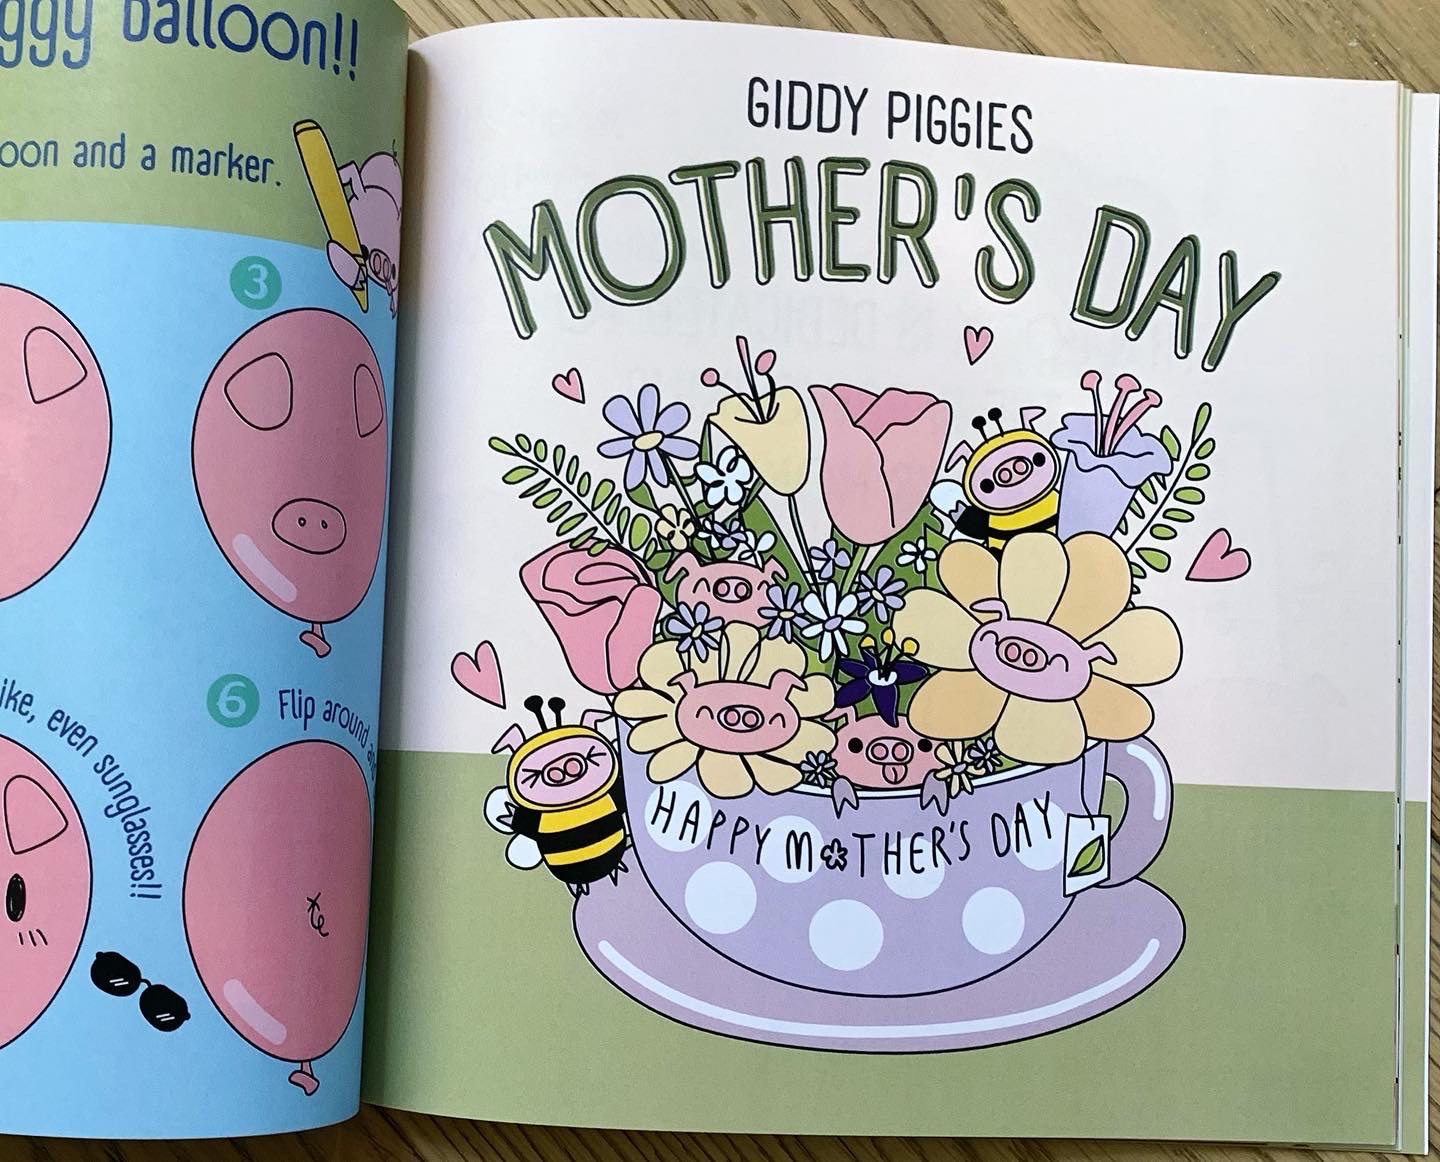 Up, Up, & Away (with Bonus Story 'Giddy Piggies Mother's Day'): A Giddy Piggies Adventure